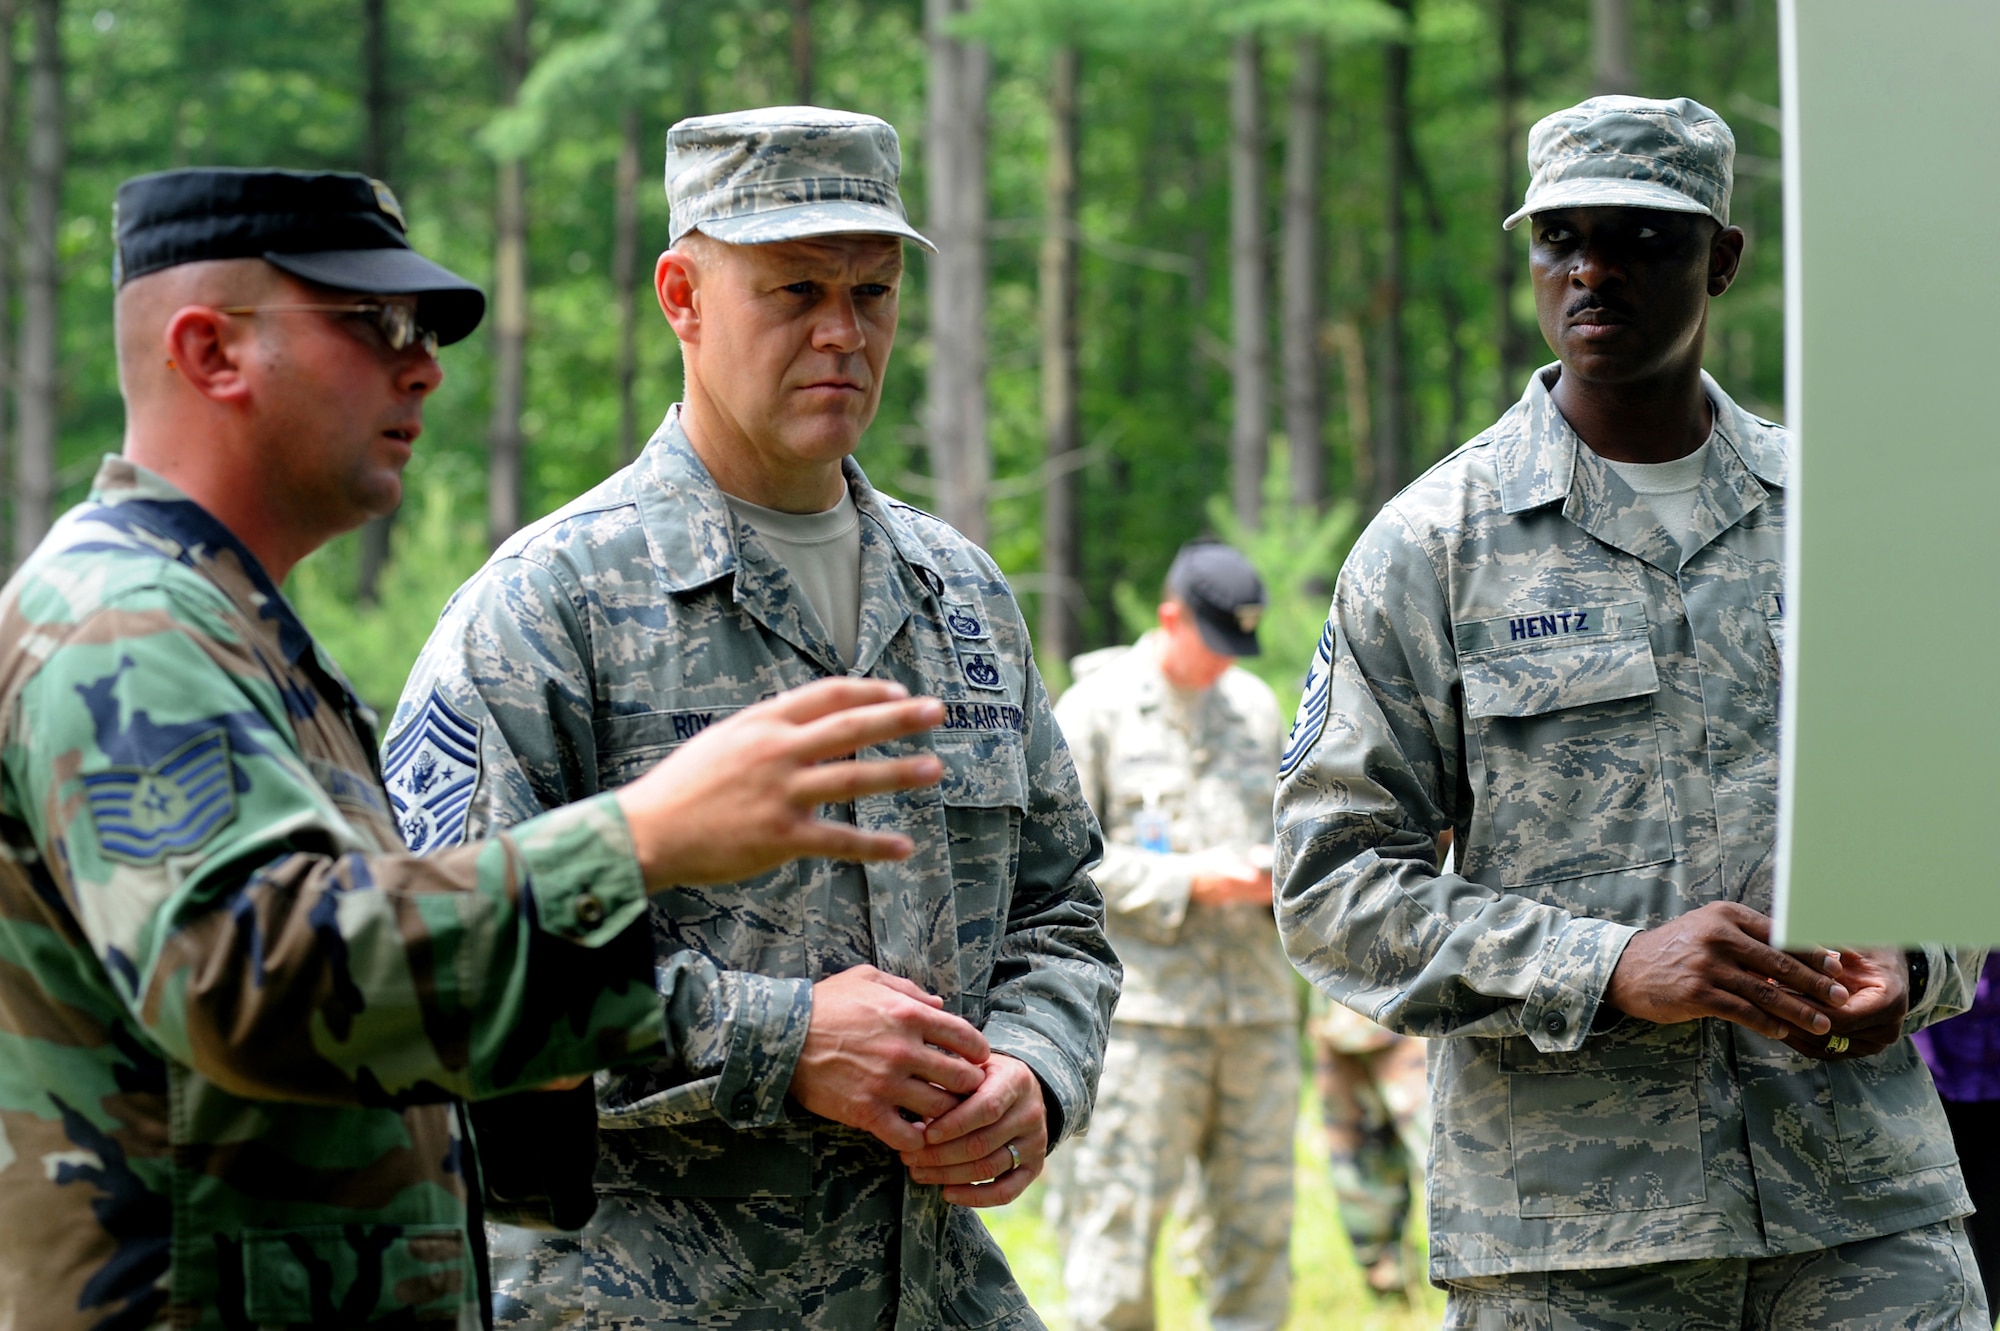 Technical Sgt. Donald Satterlee, from the U.S. Air Force Expeditionary Center's 421st Combat Training Squadron, briefs Chief Master Sgt. of the Air Force James Roy about Advanced Contingency Skills Training for Airmen while Chief Master Sergeant Fitzgerald Hentz, U.S. Air Force Expeditionary Center command chief, listens.  Part of the July 29 tour took place on a Fort Dix range on Joint Base McGuire-Dix-Lakehurst, N.J.  Chief Roy visited the U.S. Air Force Expeditionary Center on Fort Dix and McGuire Air Force Base to learn more about expeditionary training and operations in both areas. (U.S. Air Force Photo/Staff Sgt. Nathan G. Bevier) 